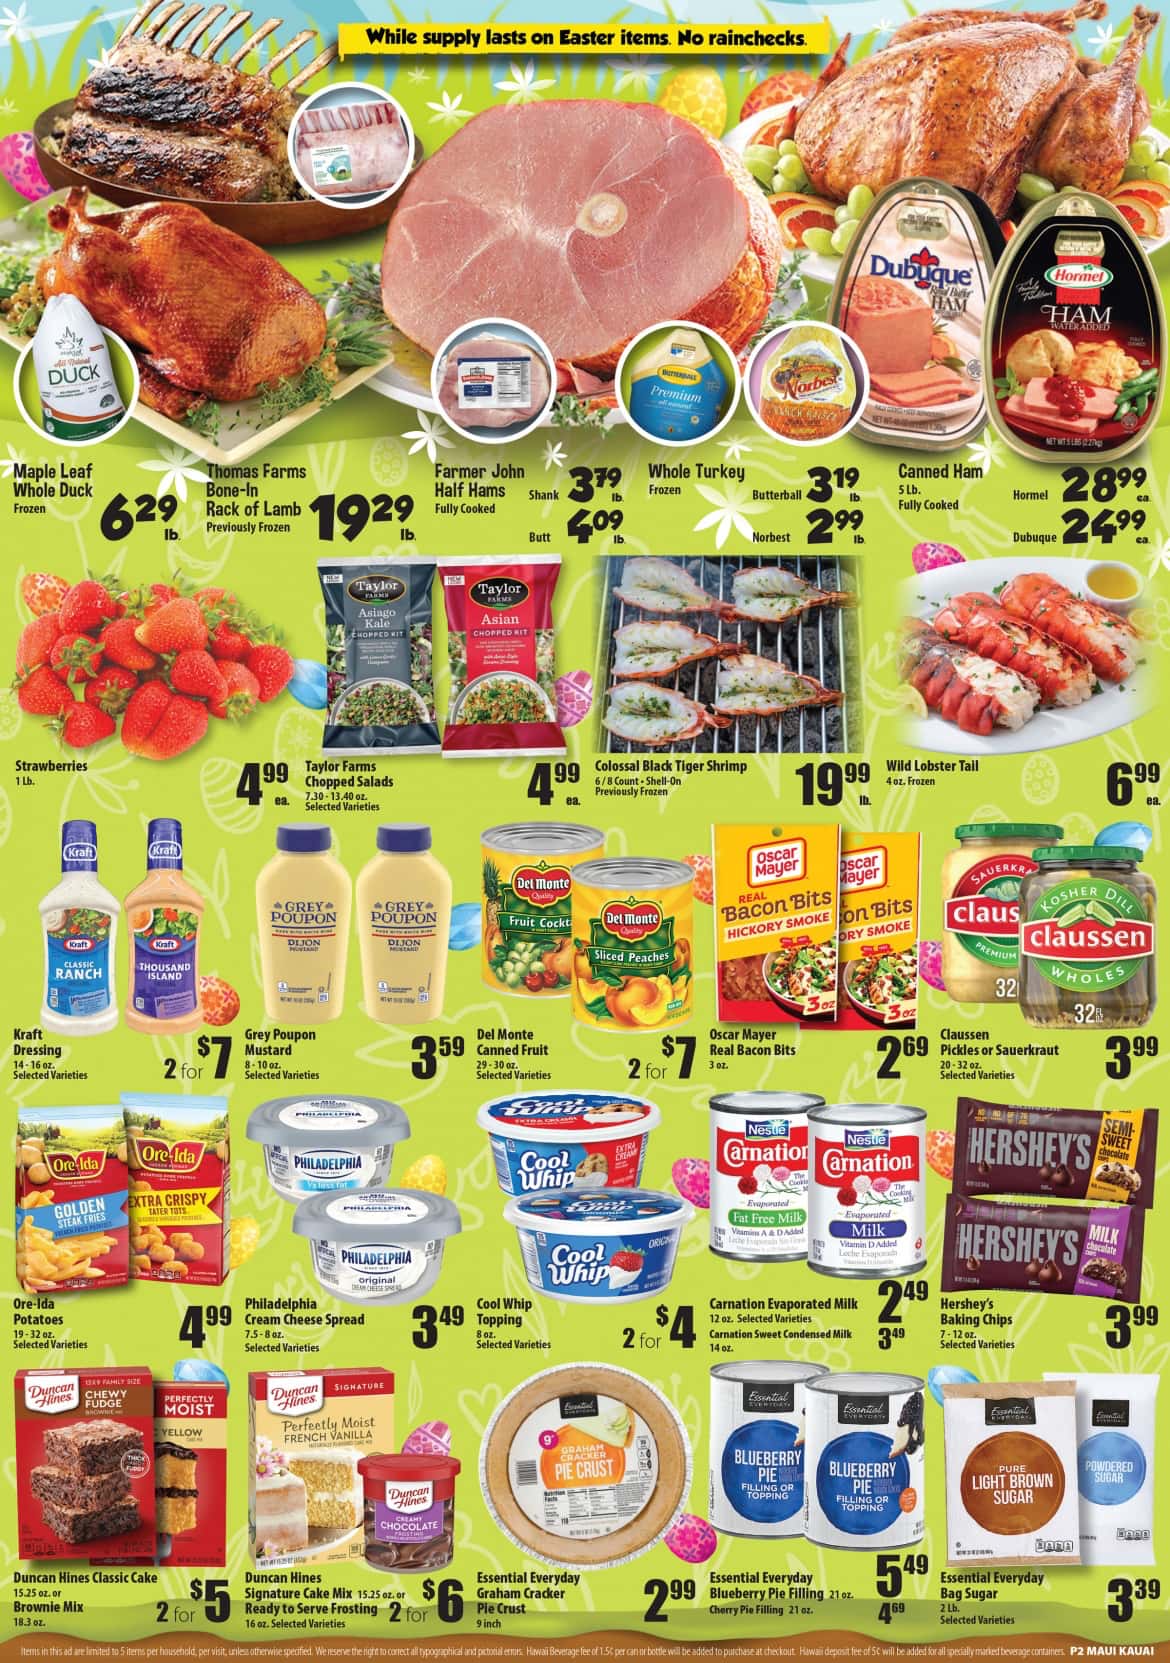 TimesSupermarkets_weekly_ad_032724_02